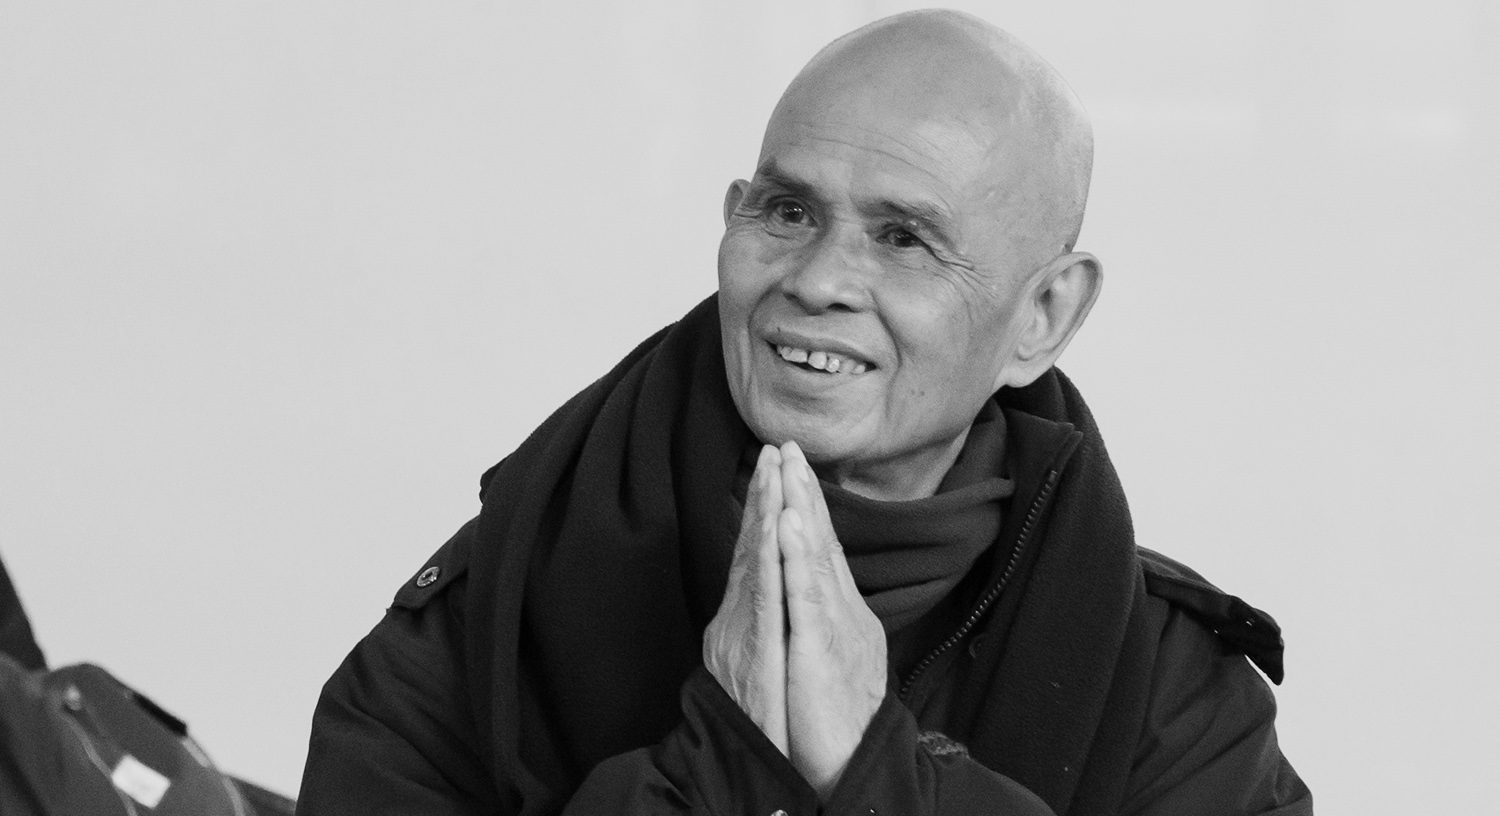 Thich-Nhat-Hanh-arrives-by-Kelvin-Cheuk+copy